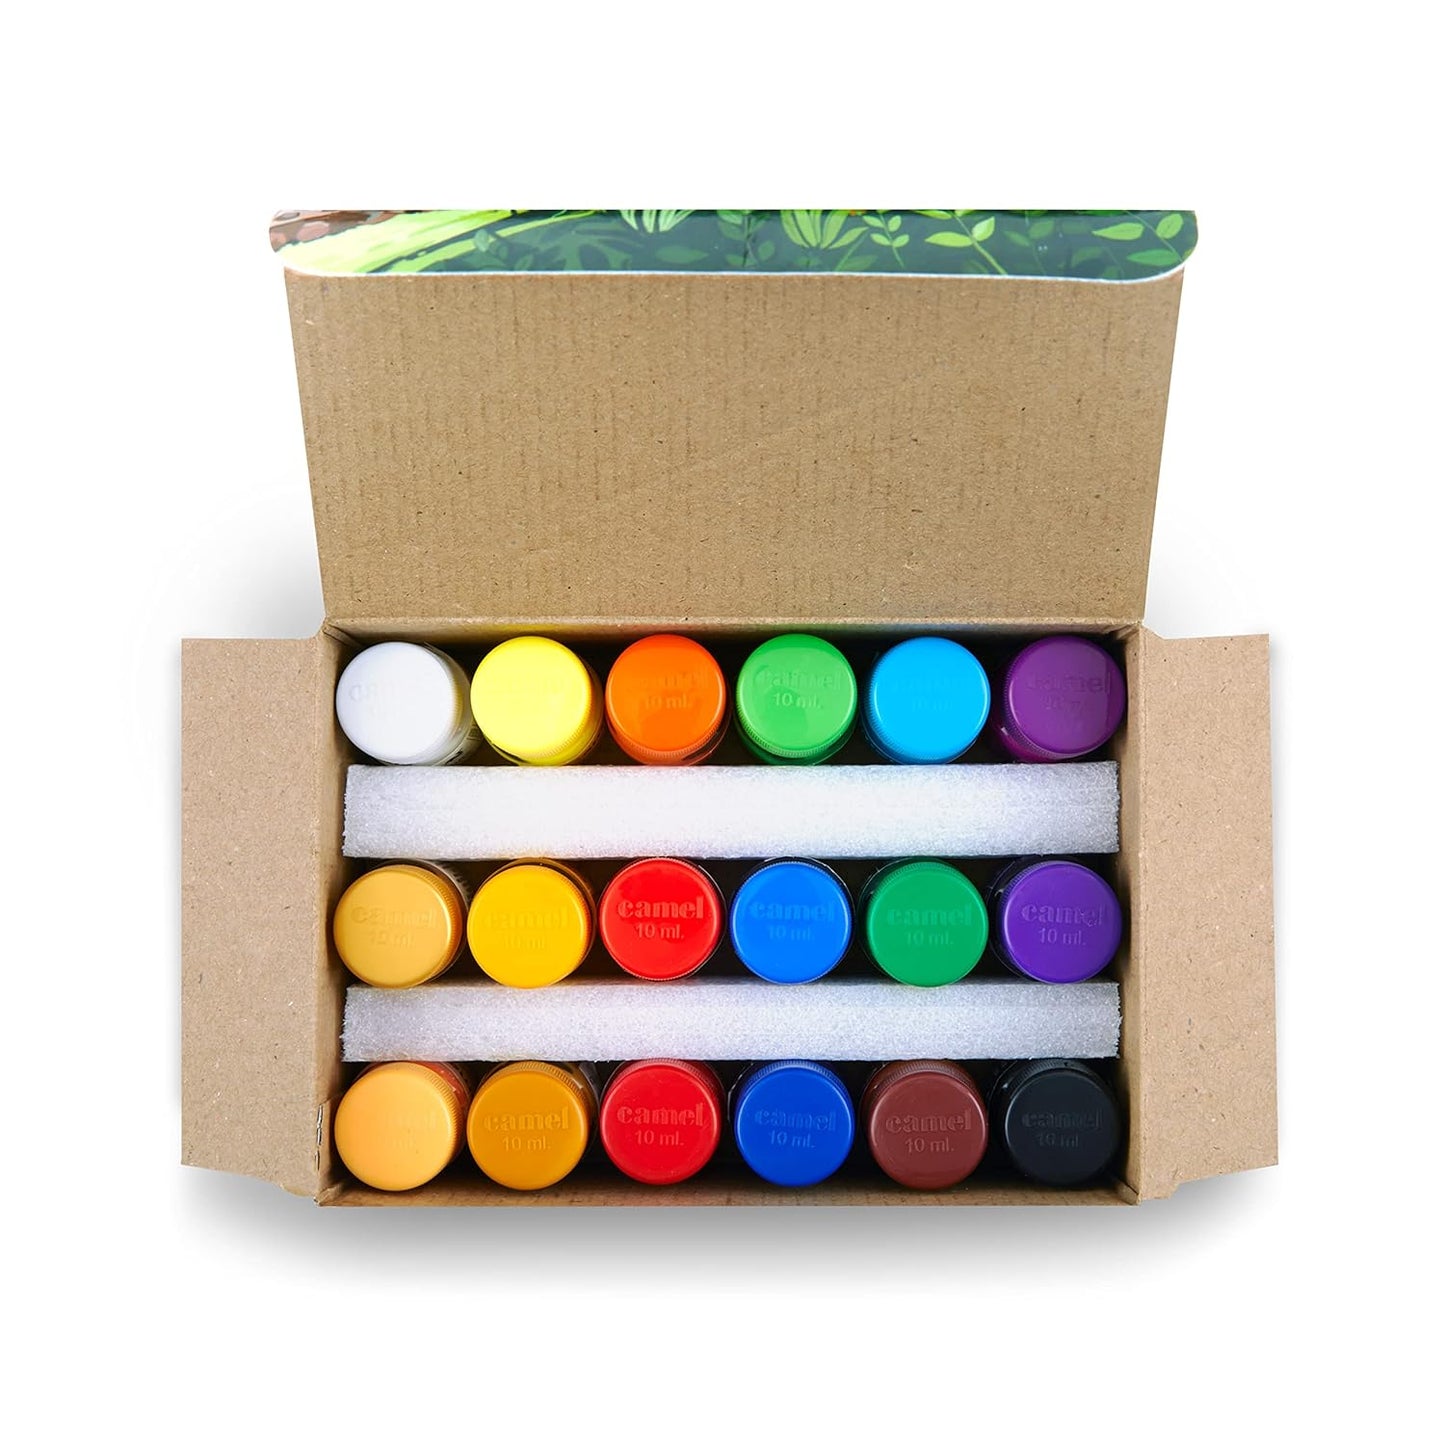 Plastic Poster colour Crayons | Camlin | 18 Shades | Extra Smooth & More Bright